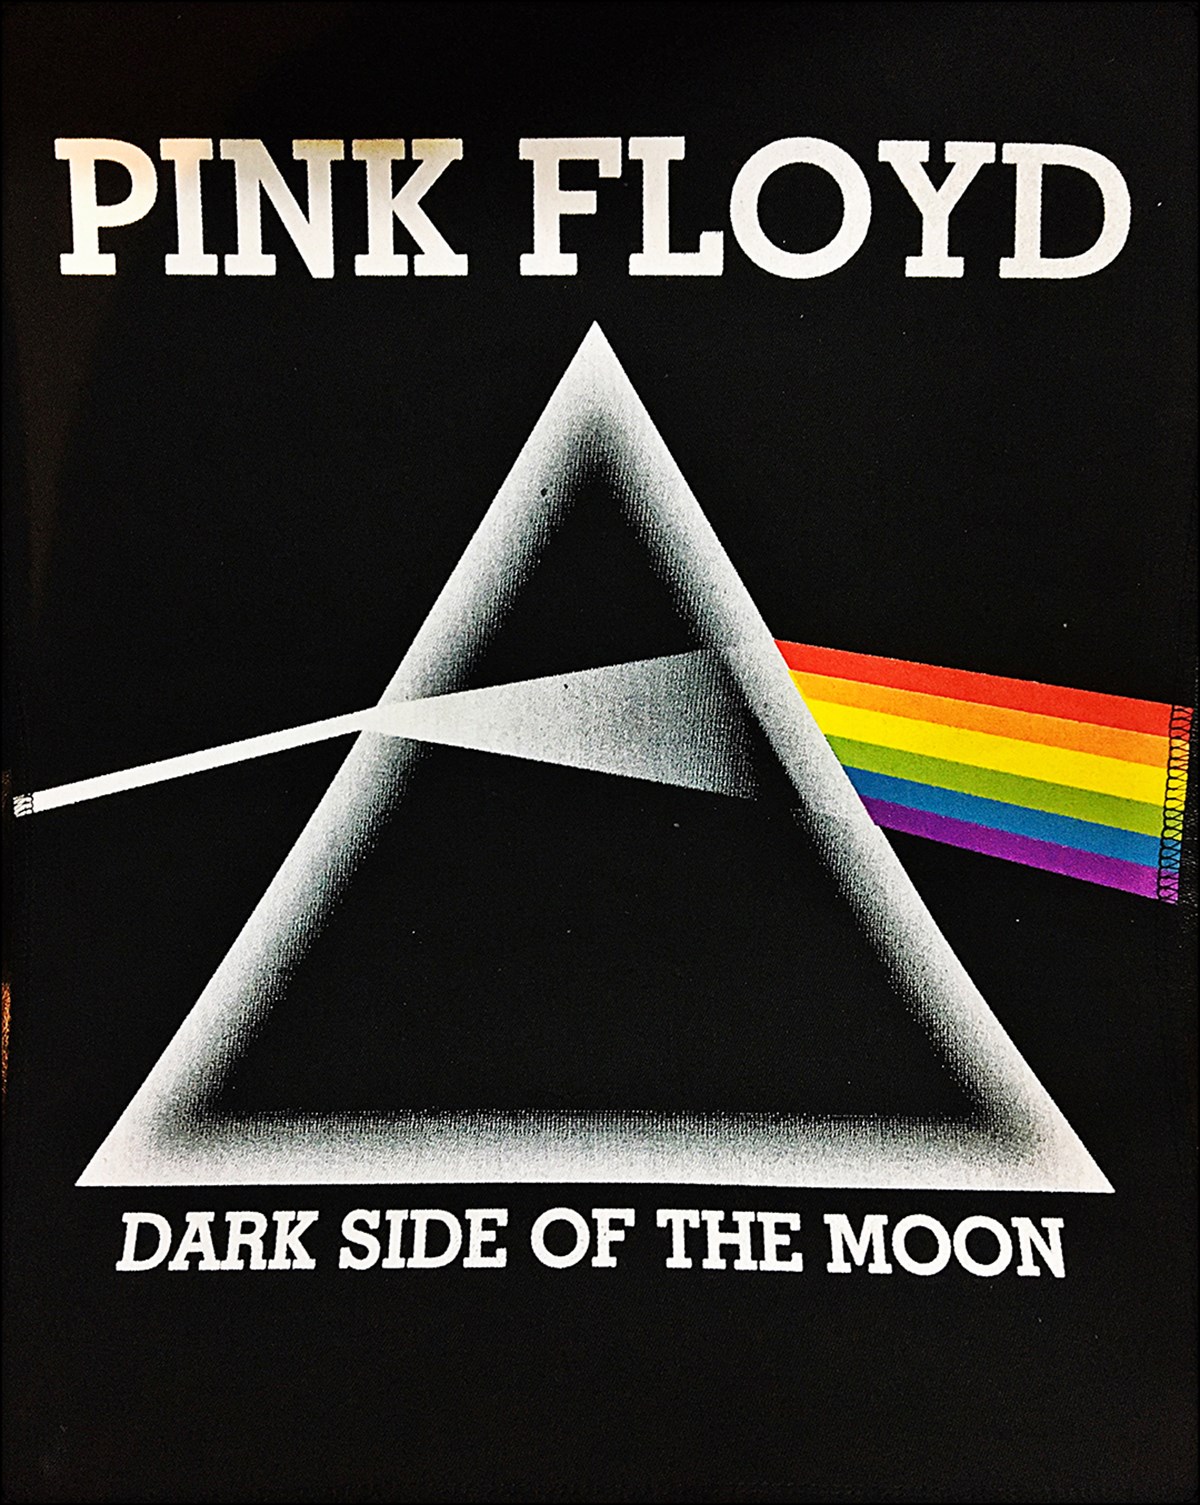 PINK FLOYD The Dark Side Of The Moon Back Patch.